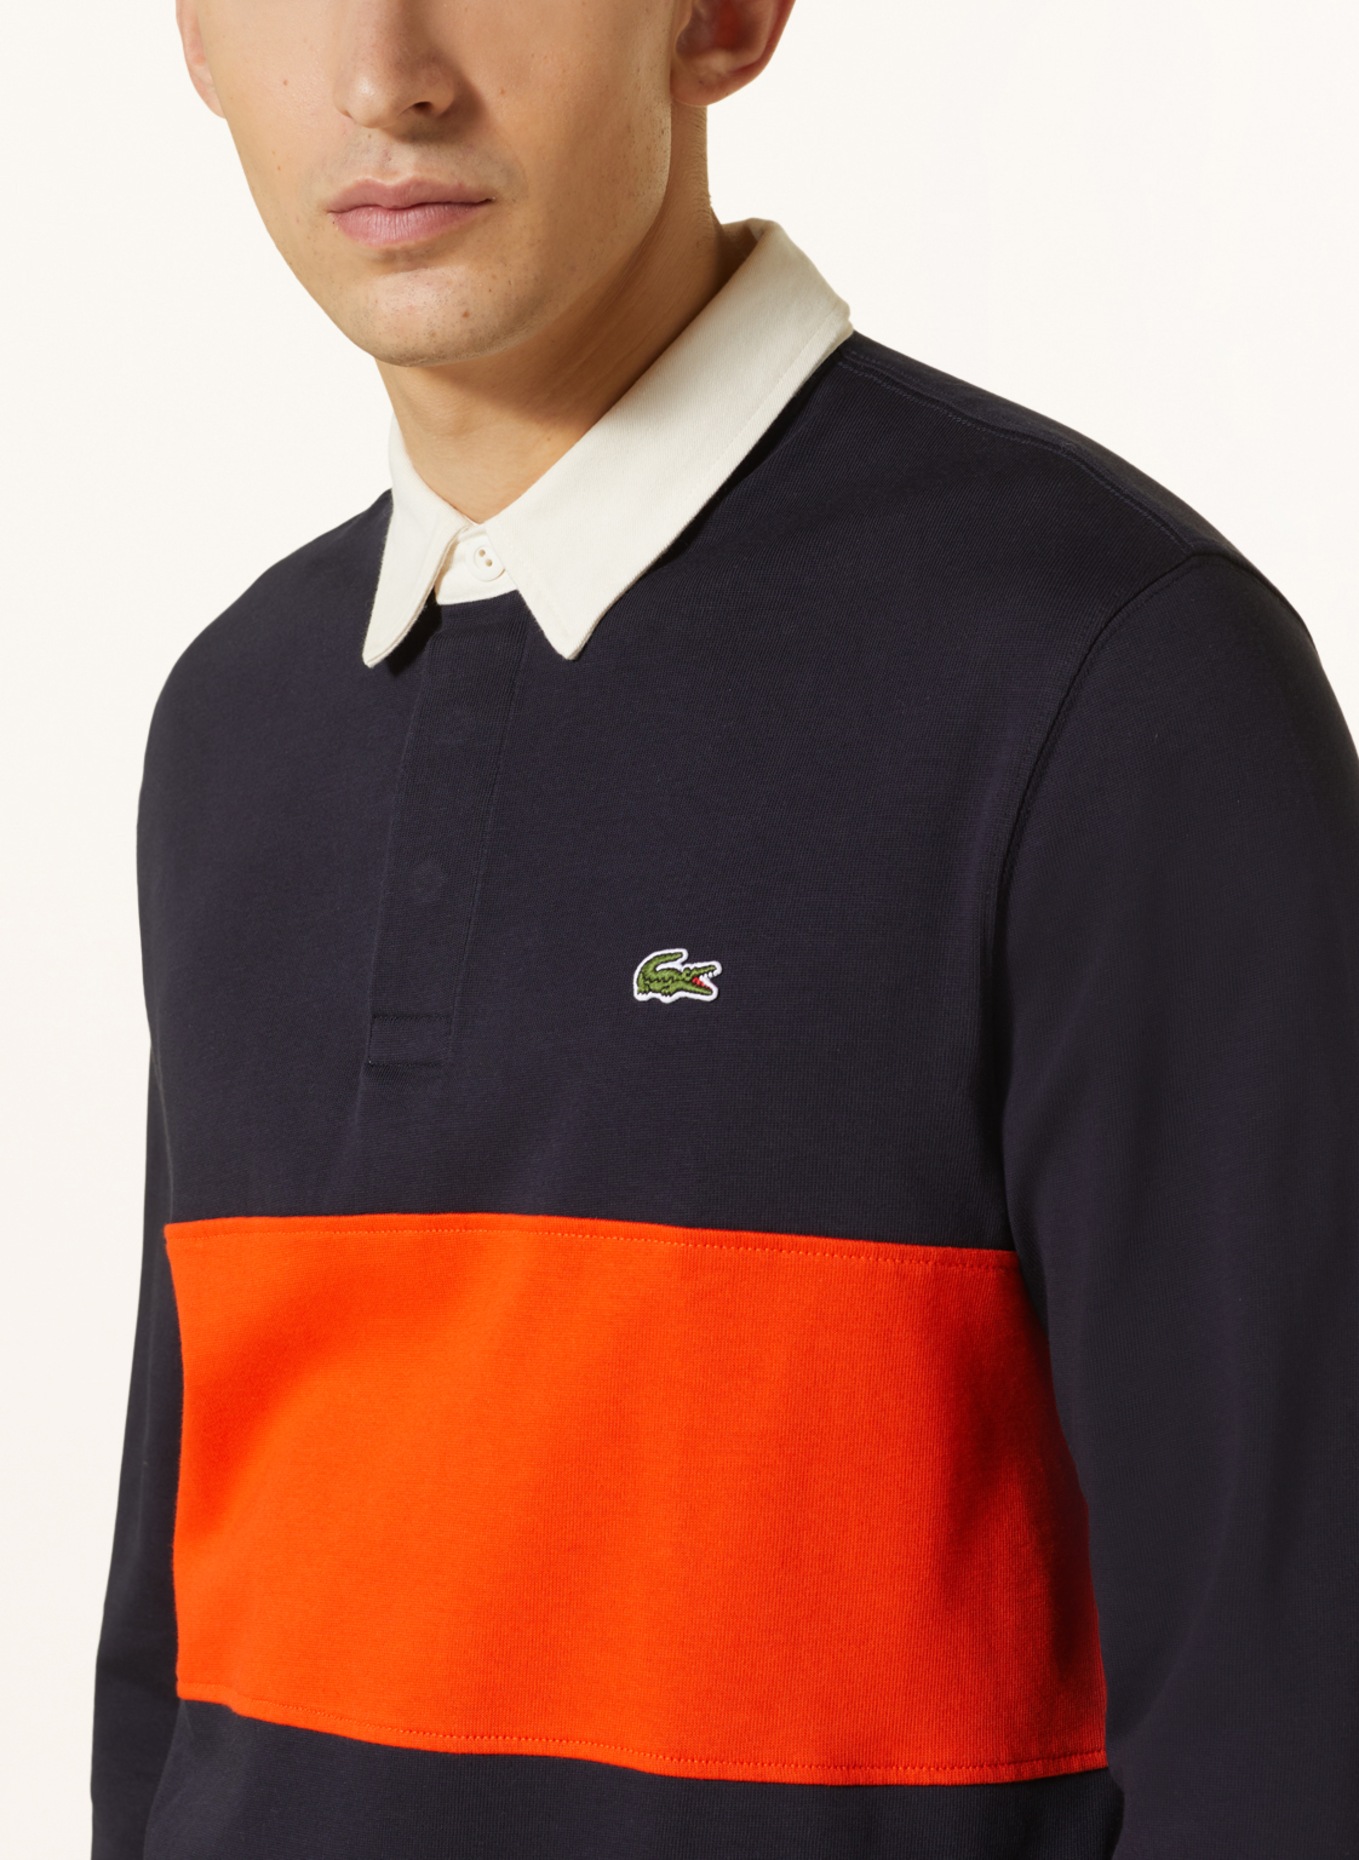 LACOSTE Jersey-Poloshirt Relaxed Fit, Farbe: DUNKELBLAU/ ROT (Bild 4)